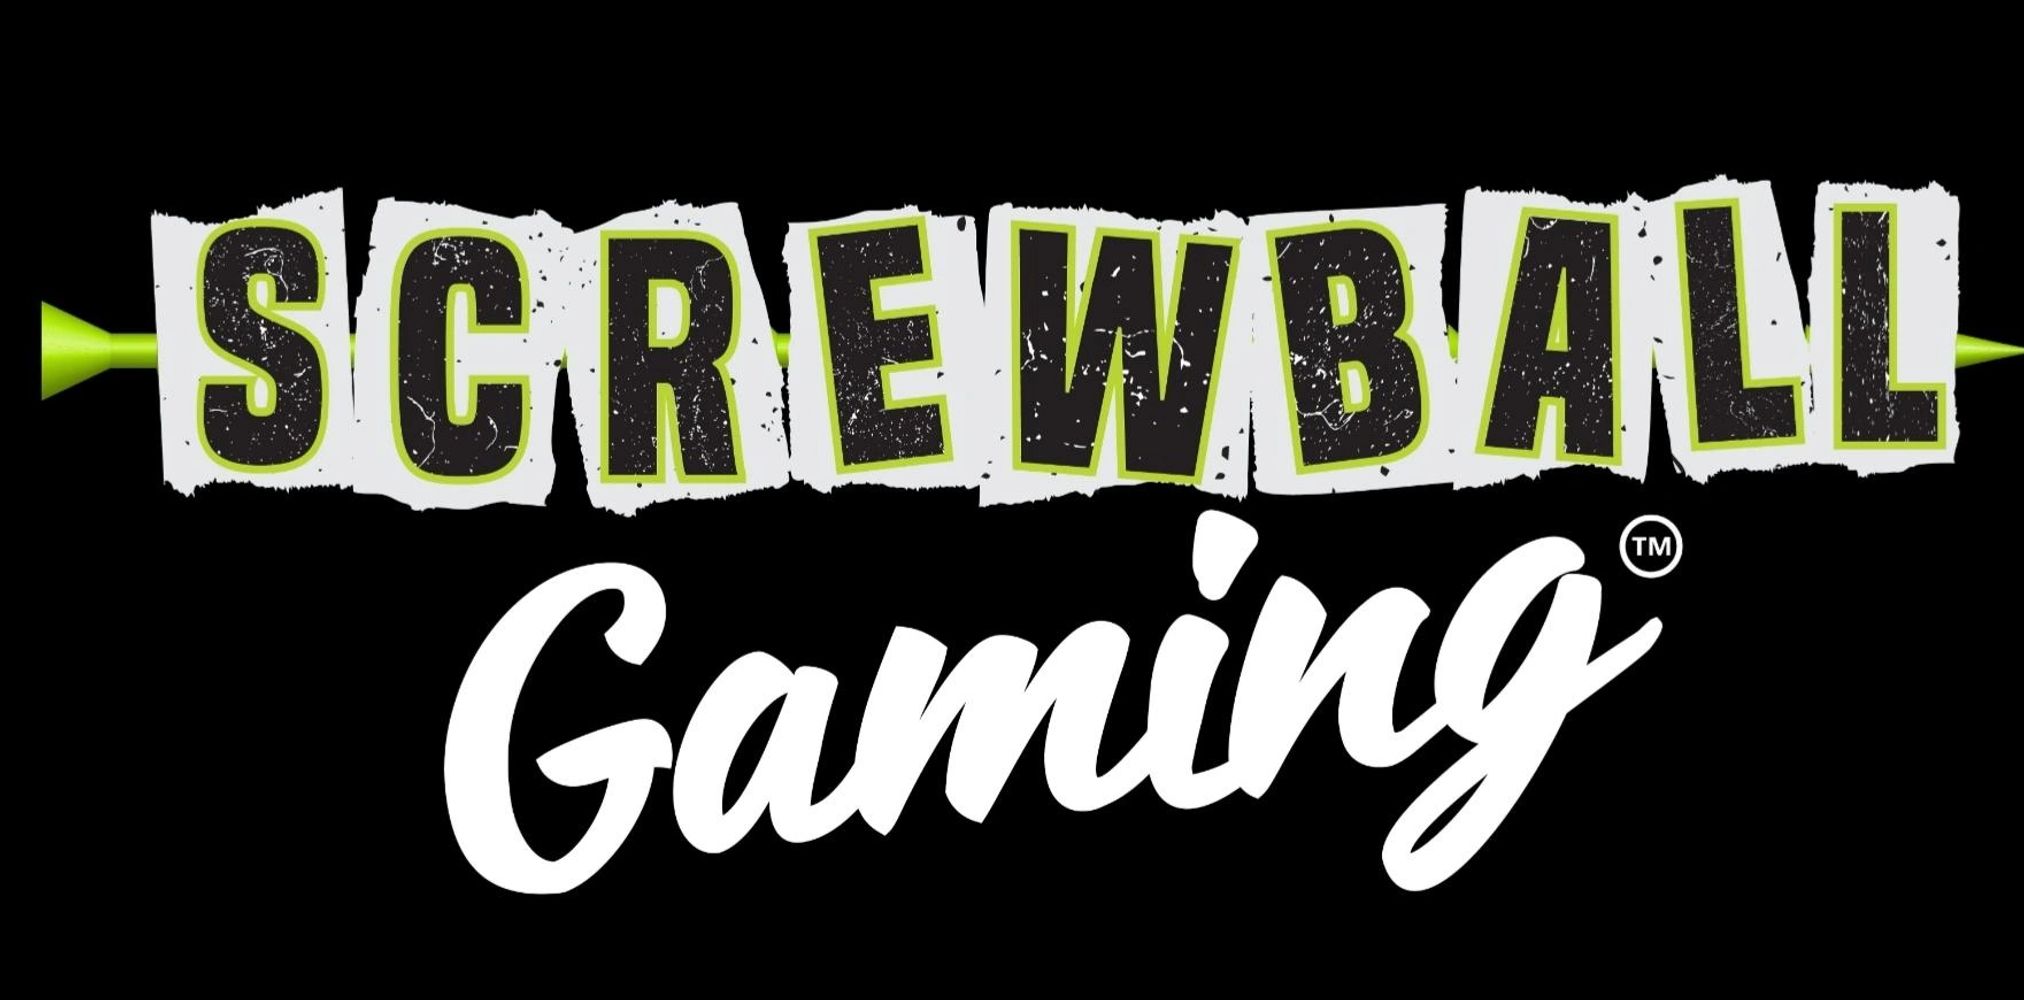 Screwball Gaming Logo is currently away. We thinks its currently streaming on Twitch but haven't con